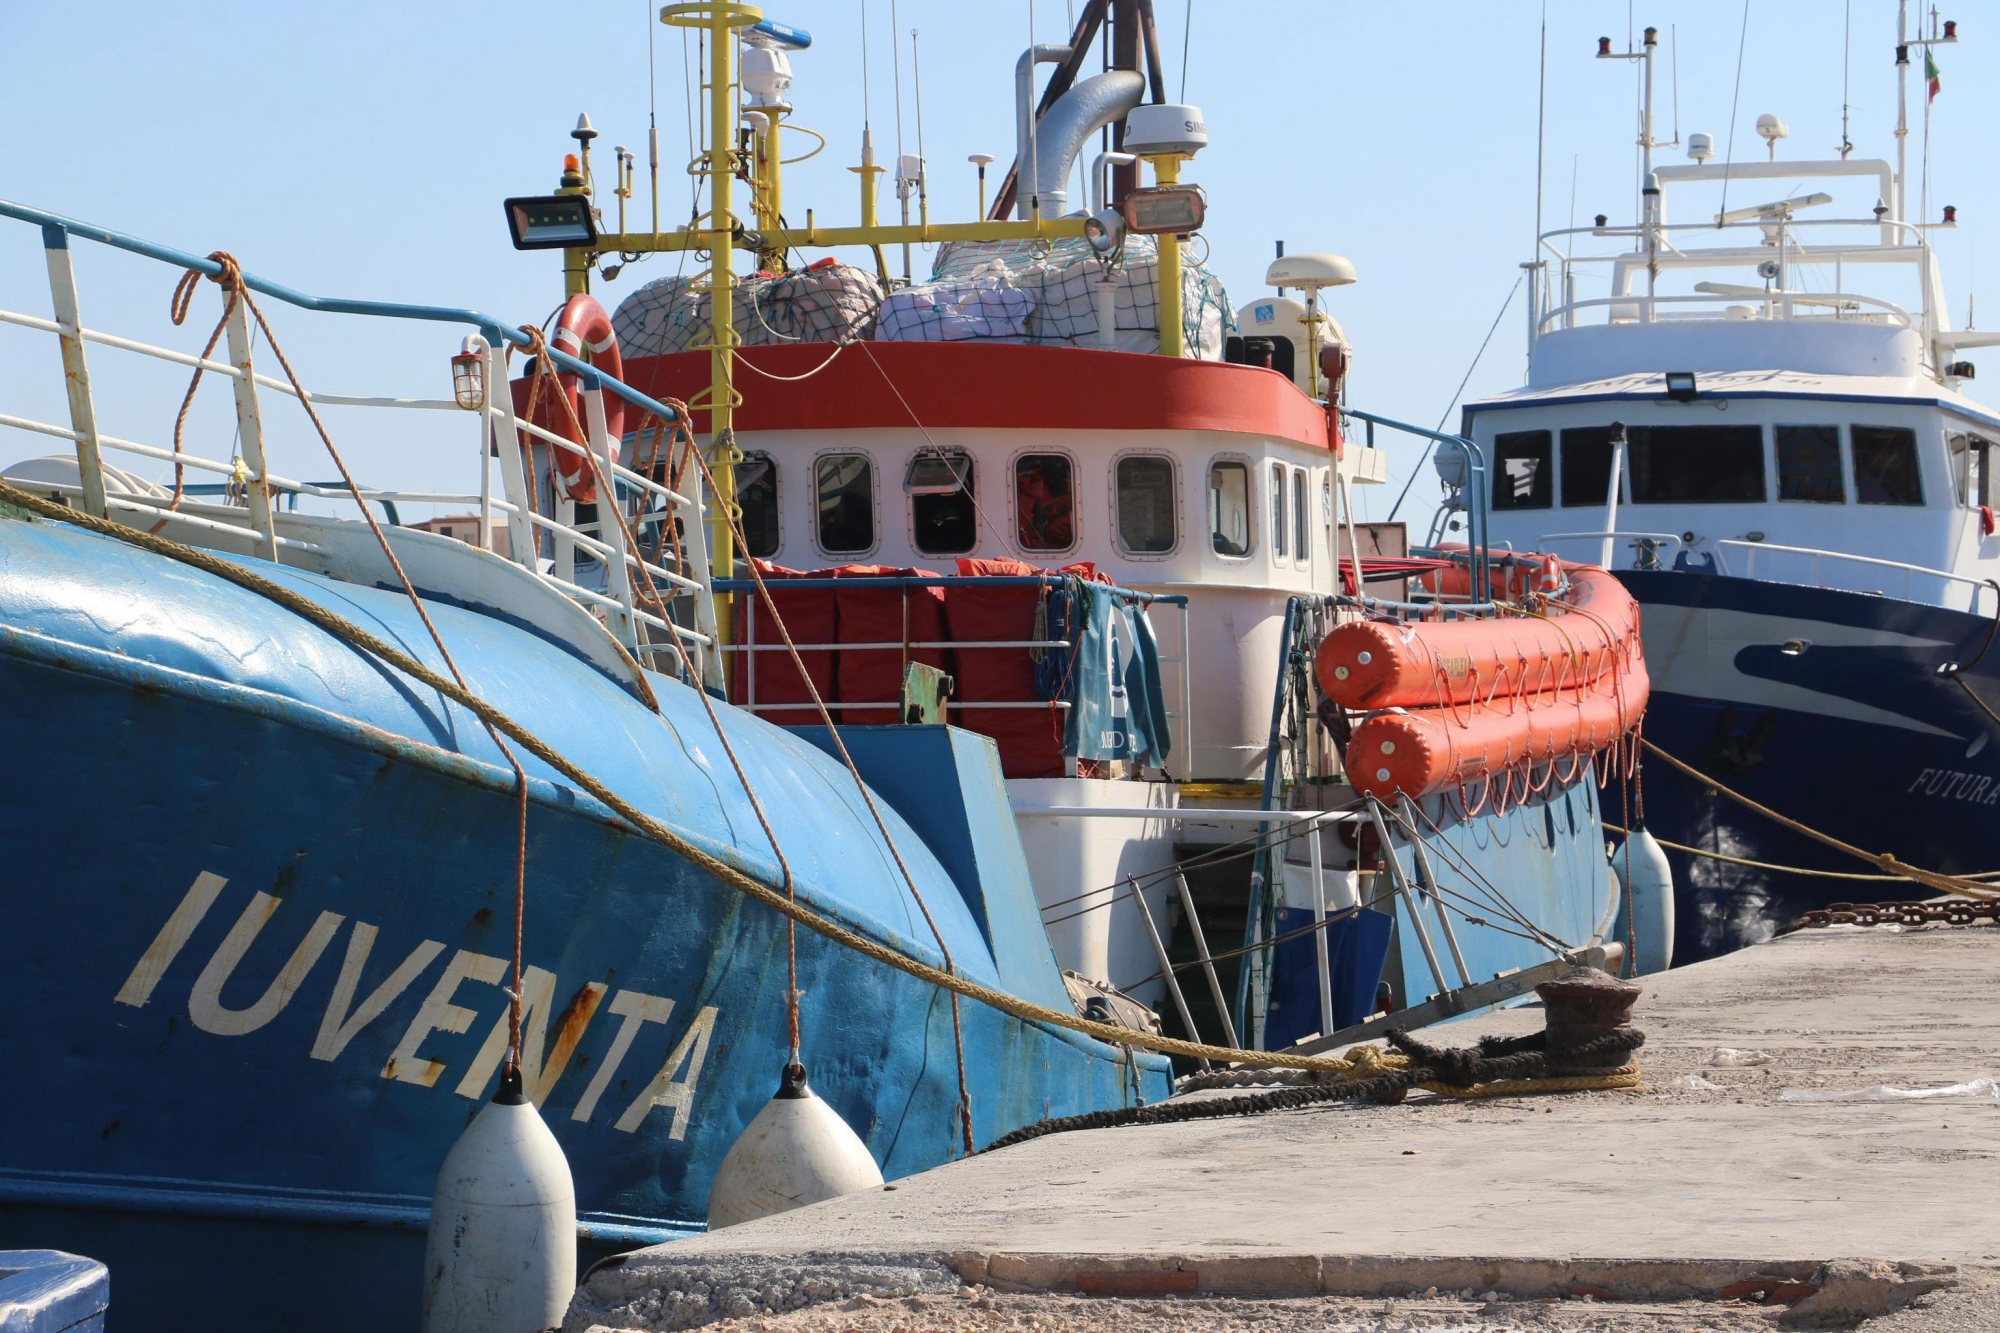 epa06120997 Iuventa Ship of the German NGO Jugend Rettet, one of the organizations that did not sign up to the Italian government Code of Conduct for migrant rescue ships, is docked for inspections in the Lampedusa harbor, Italy, 02 August 2017. Reports state some five aid groups, operating ships in the Mediterranean for rescuing migrants, rejected a new Code of Conduct, prepared by the Italian Interior Ministry, and their ships may now face additional checks from Italian authorities. The new Code of Conduct is said to face people smuggling, while opposing organizations say the new measures will affect effectiveness of their rescuing operations.  EPA/ELIO DESIDERIO ITALY MIGRATION SHIP INSPECTION